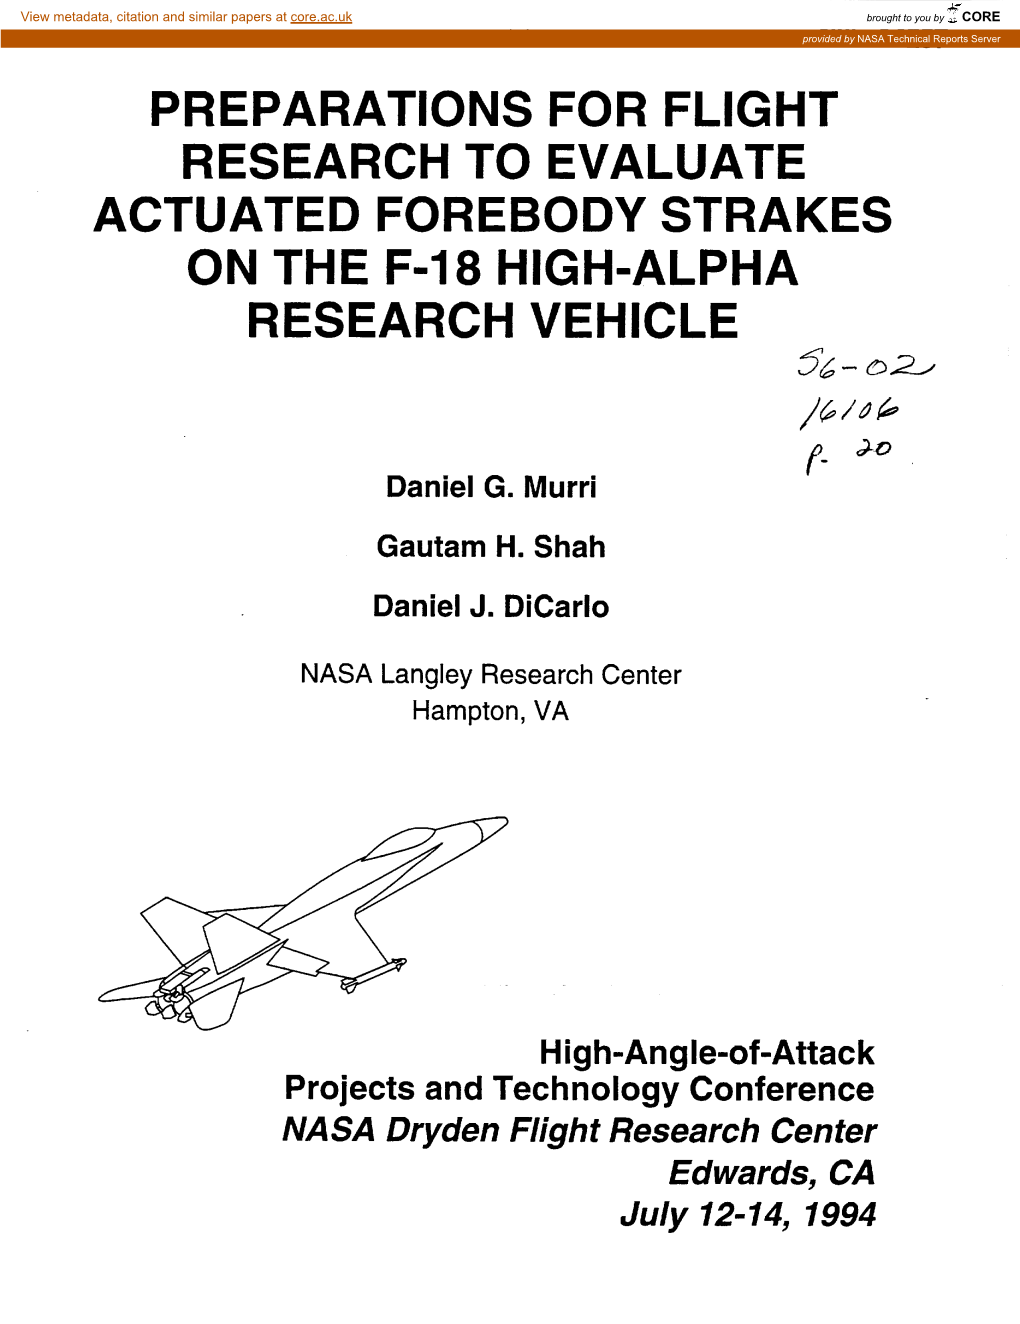 Preparations for Flight Research to Evaluate Actuated Forebody Strakes on the F-18 High-Alpha Research Vehicle